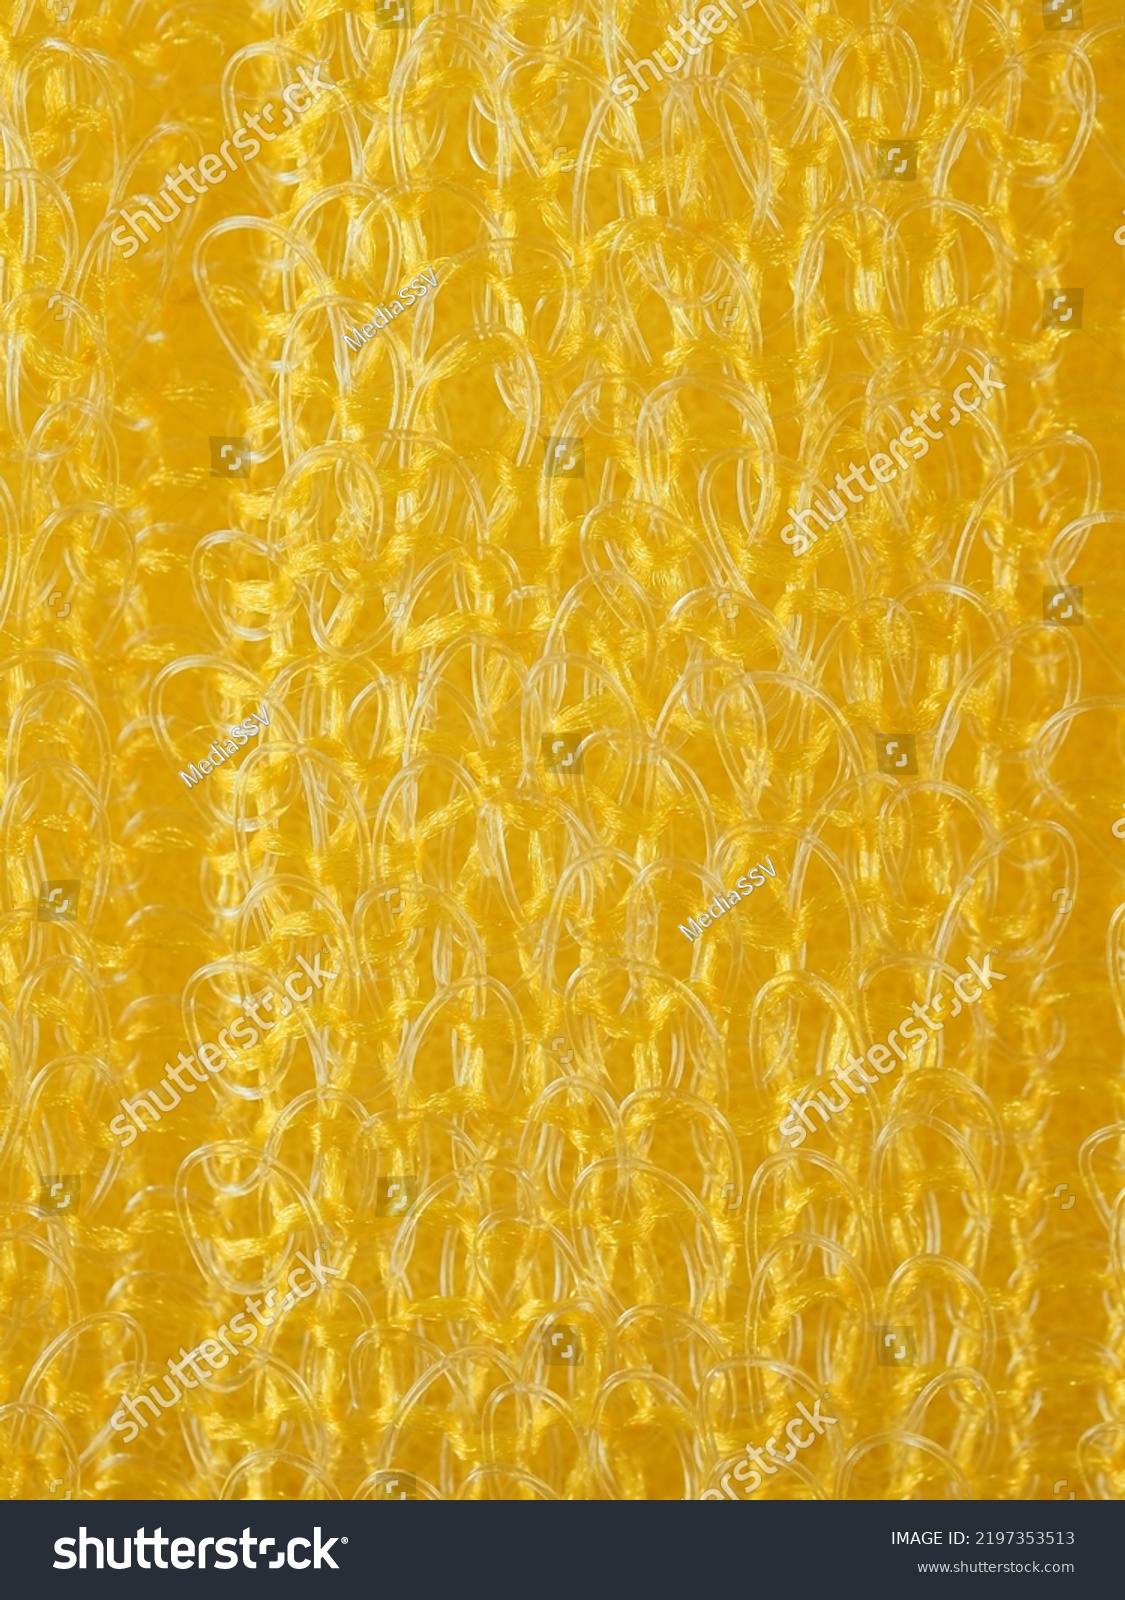 close up, background, texture, large vertical banner. heterogeneous surface structure bright saturated yellow sponge for washing dishes, kitchen, bath. full depth of field. high resolution photo #2197353513